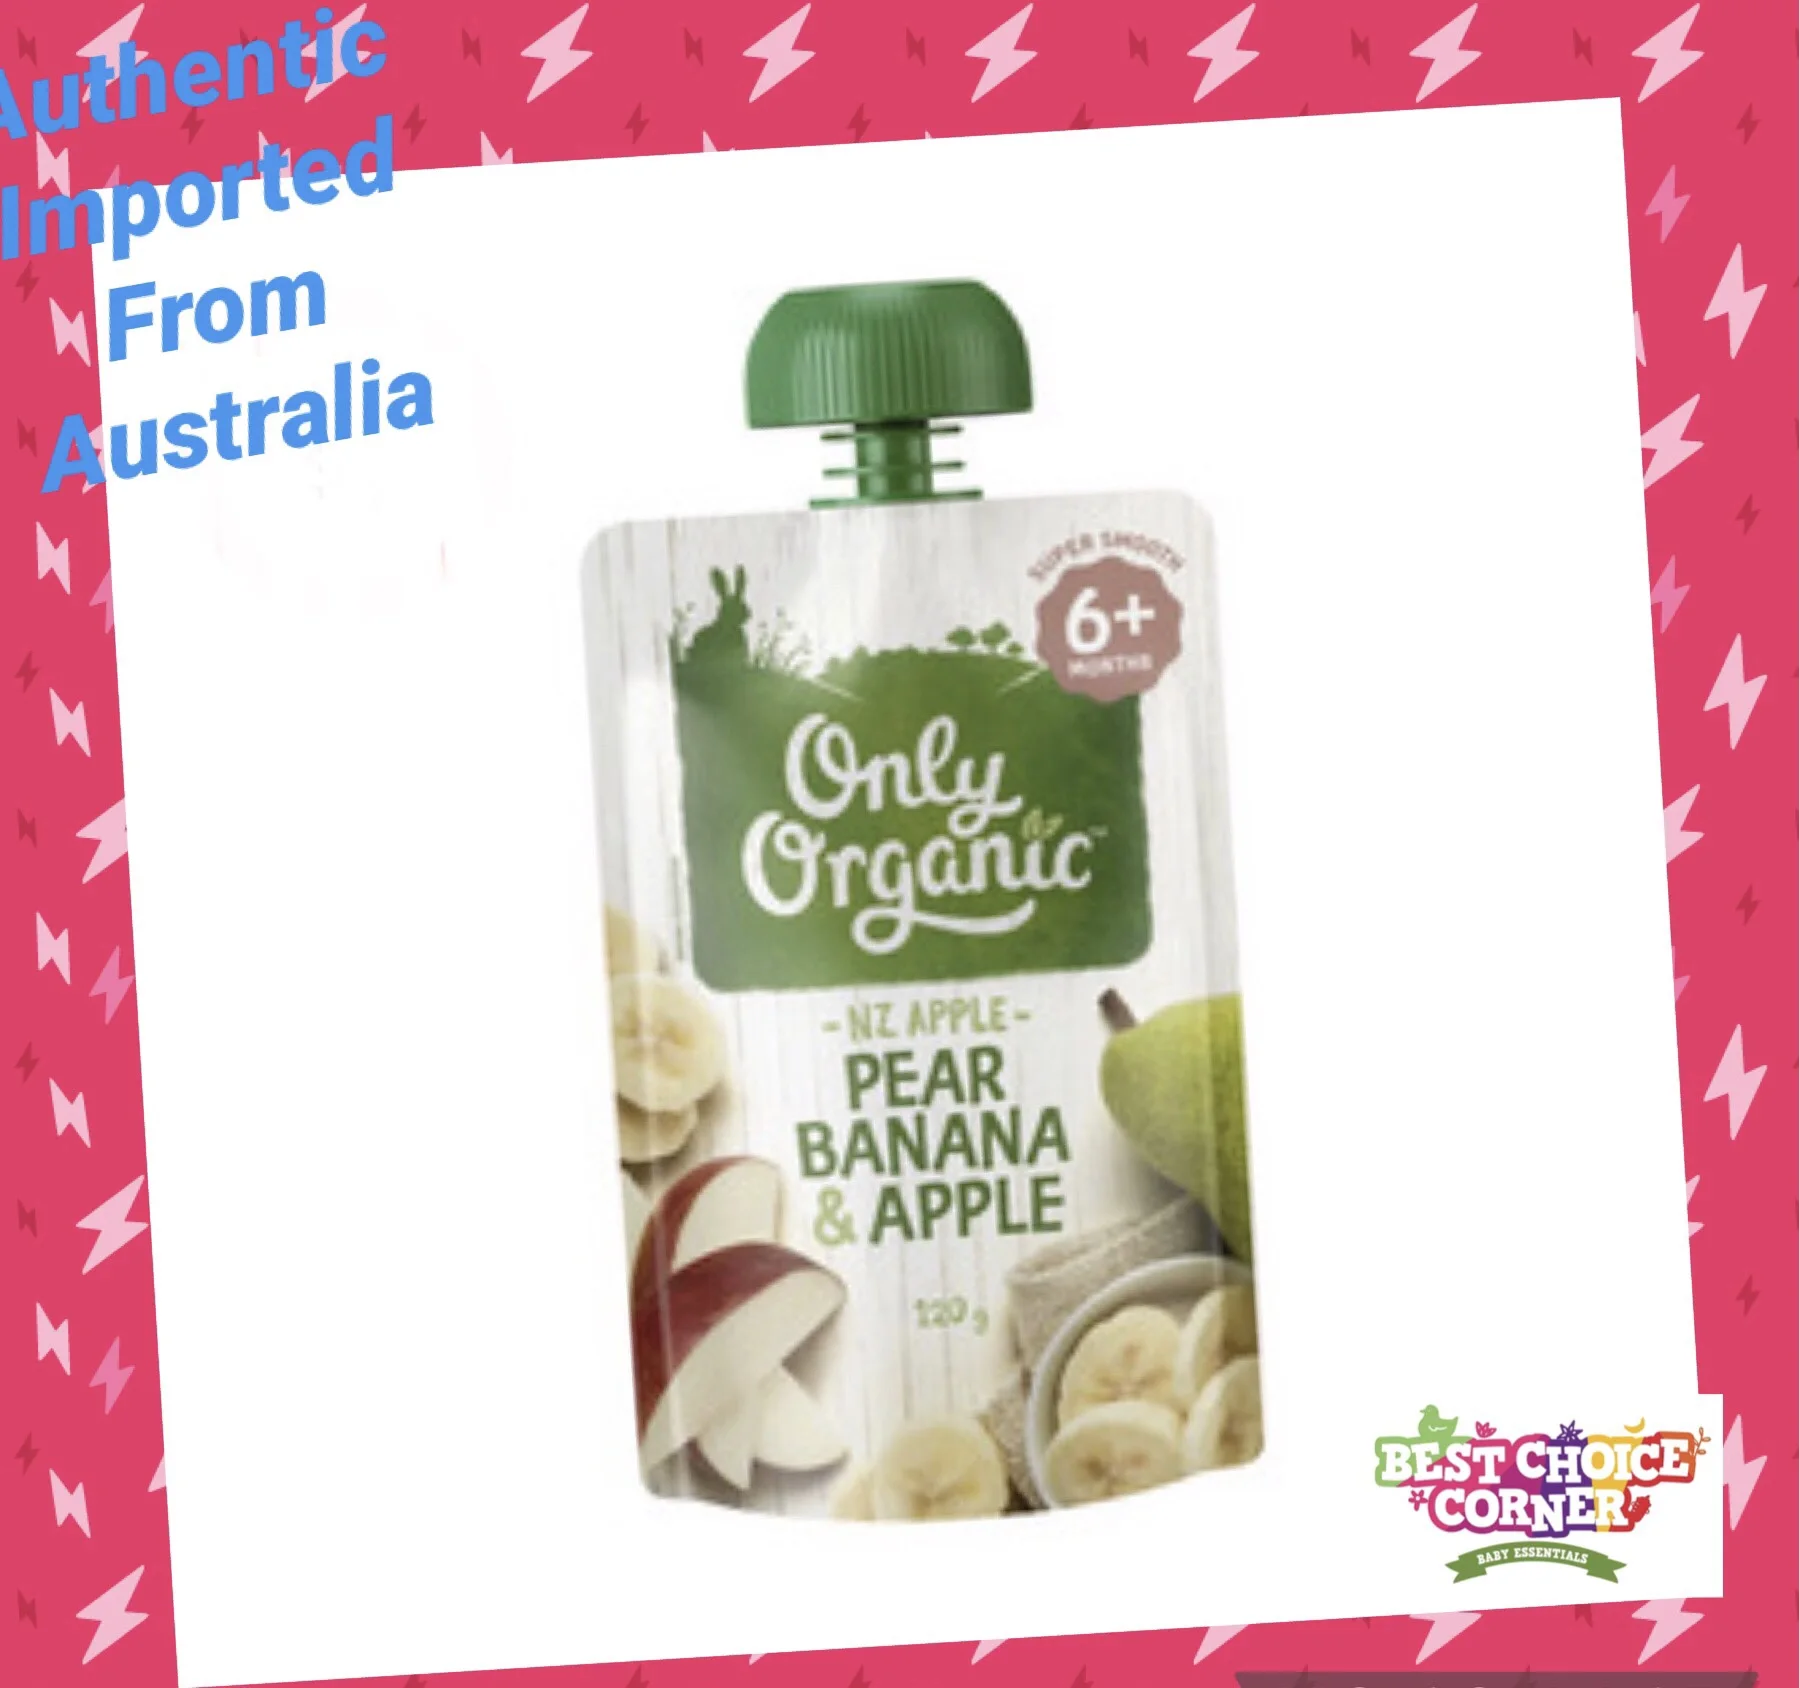 Only Organic Pear Banana & Apple 6+ Months 120g